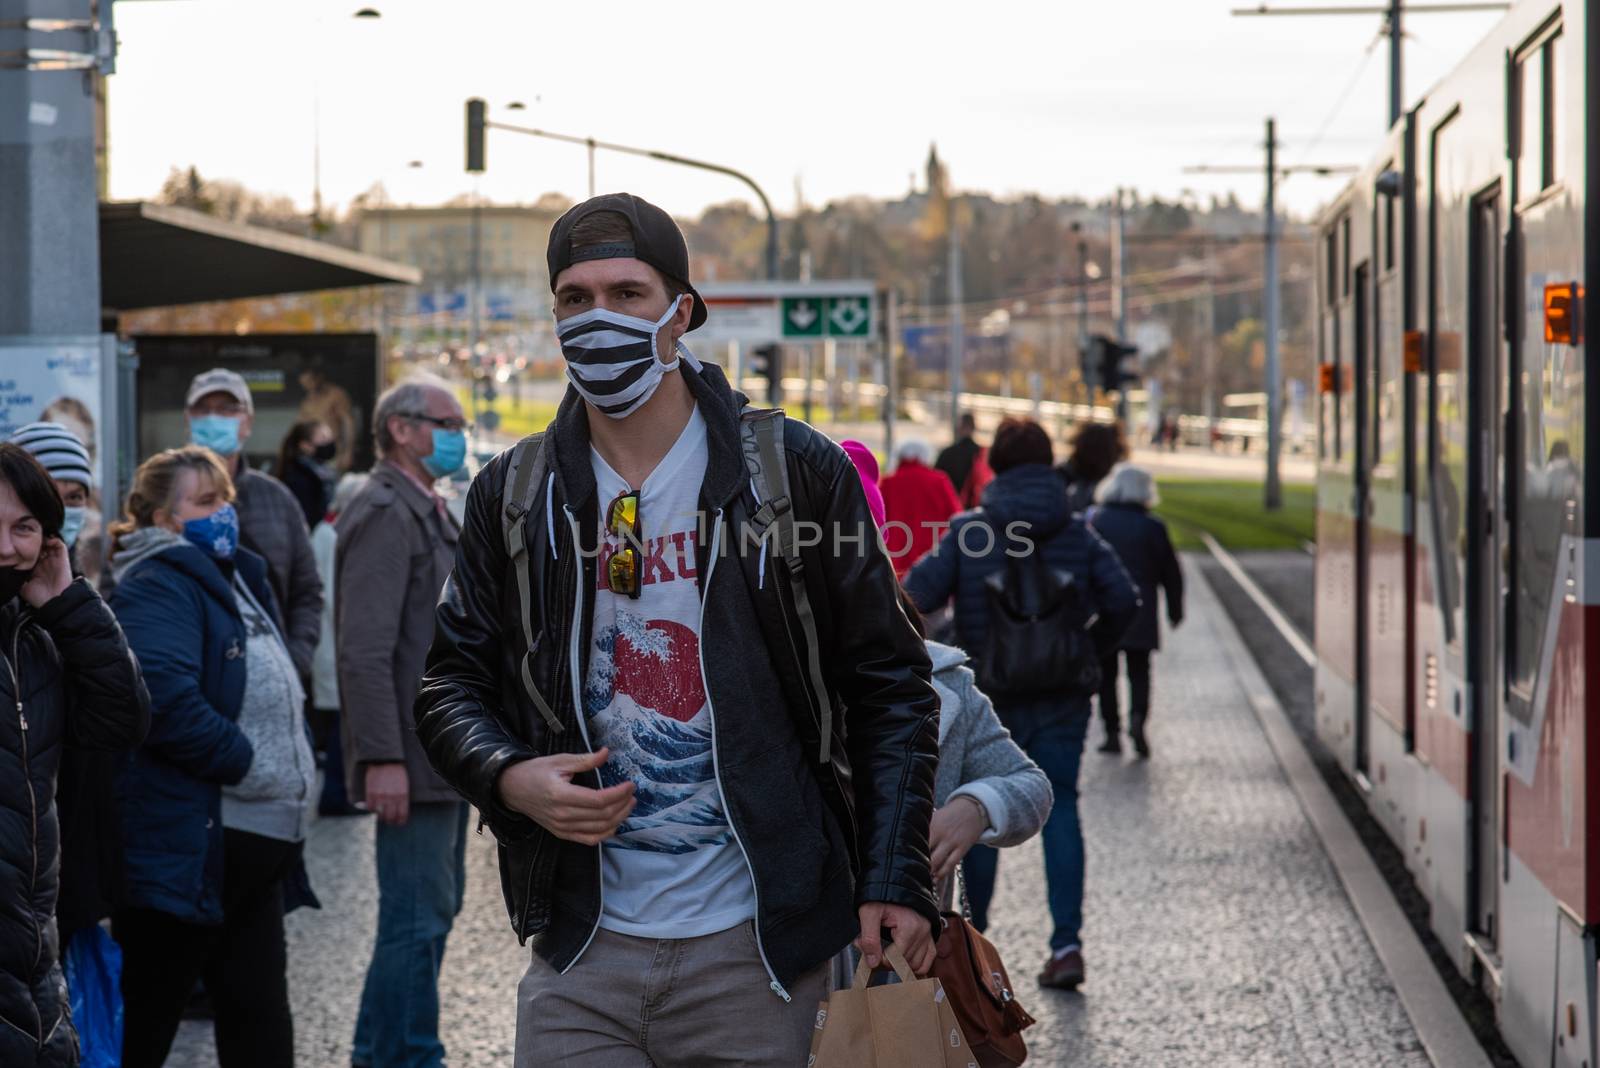 11-23-2020. Prague, Czech Republic. People walking and talking outside during coronavirus (COVID-19) at Hradcanska metro stop in Prague 6. Man getting out the tram.